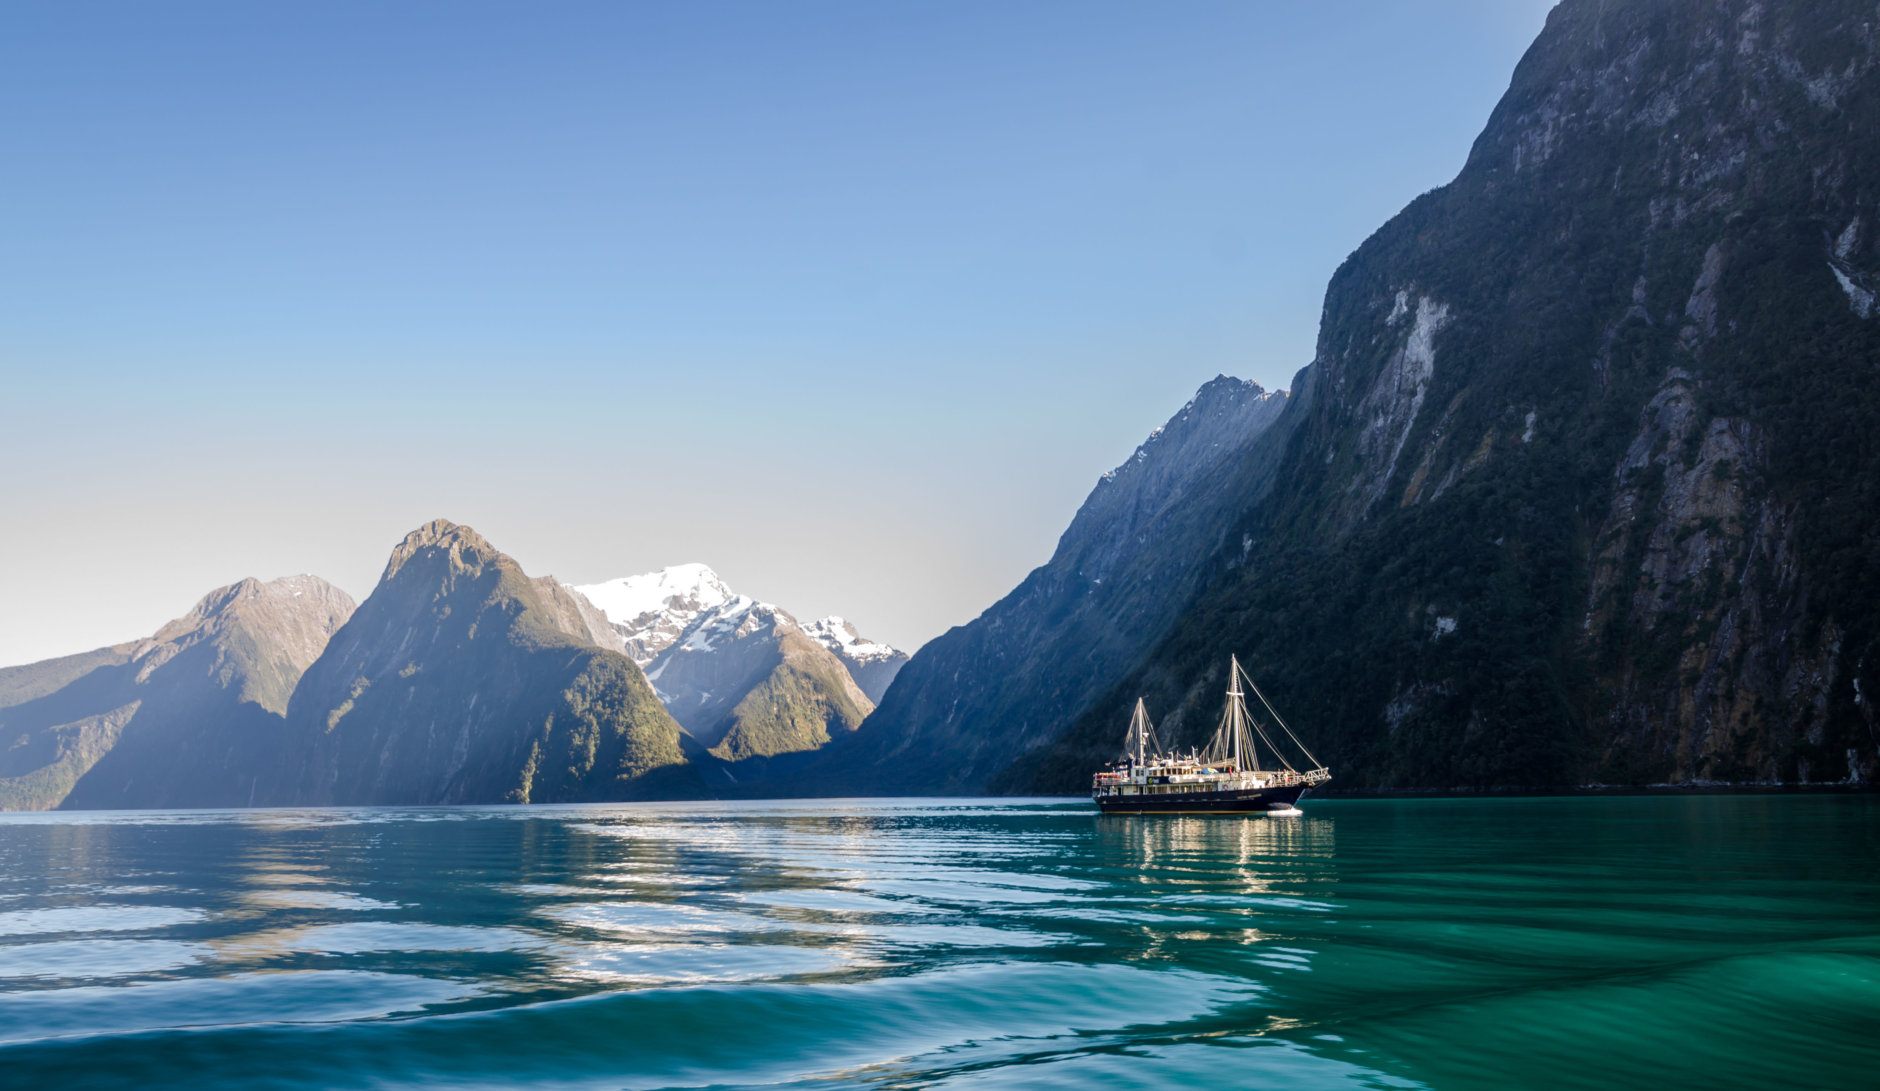 World famlous Fiord of Milford Sound in South Island of New Zealand. This Fiord is located in Fiordland National park.